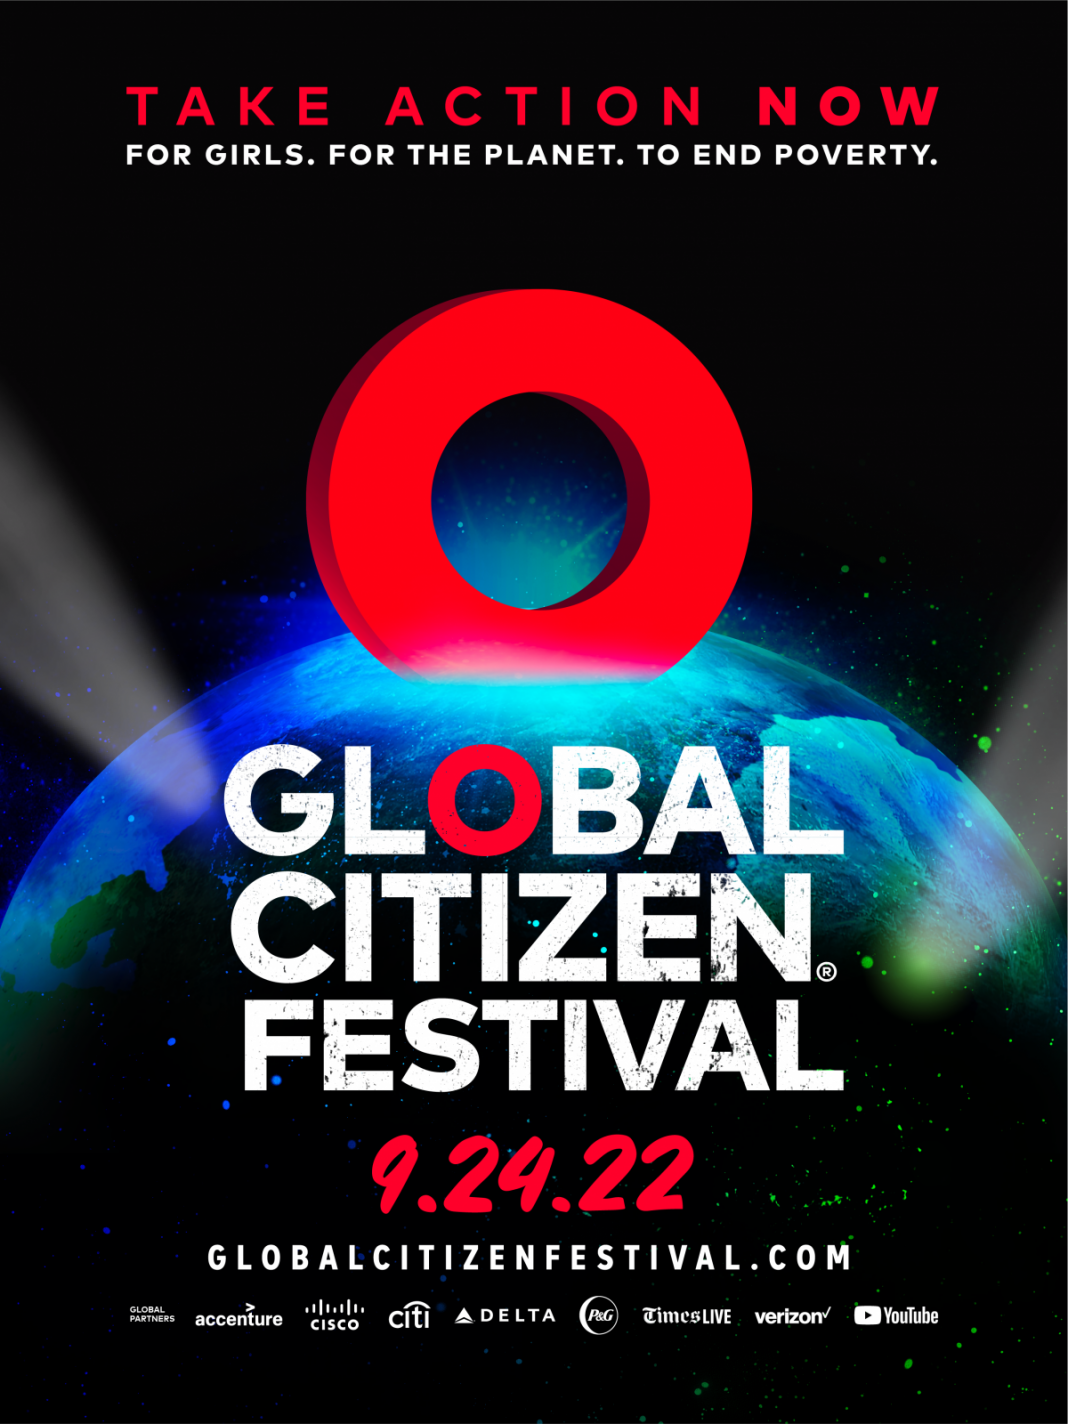 Global Citizen Festival announces its music lineup for its 10th